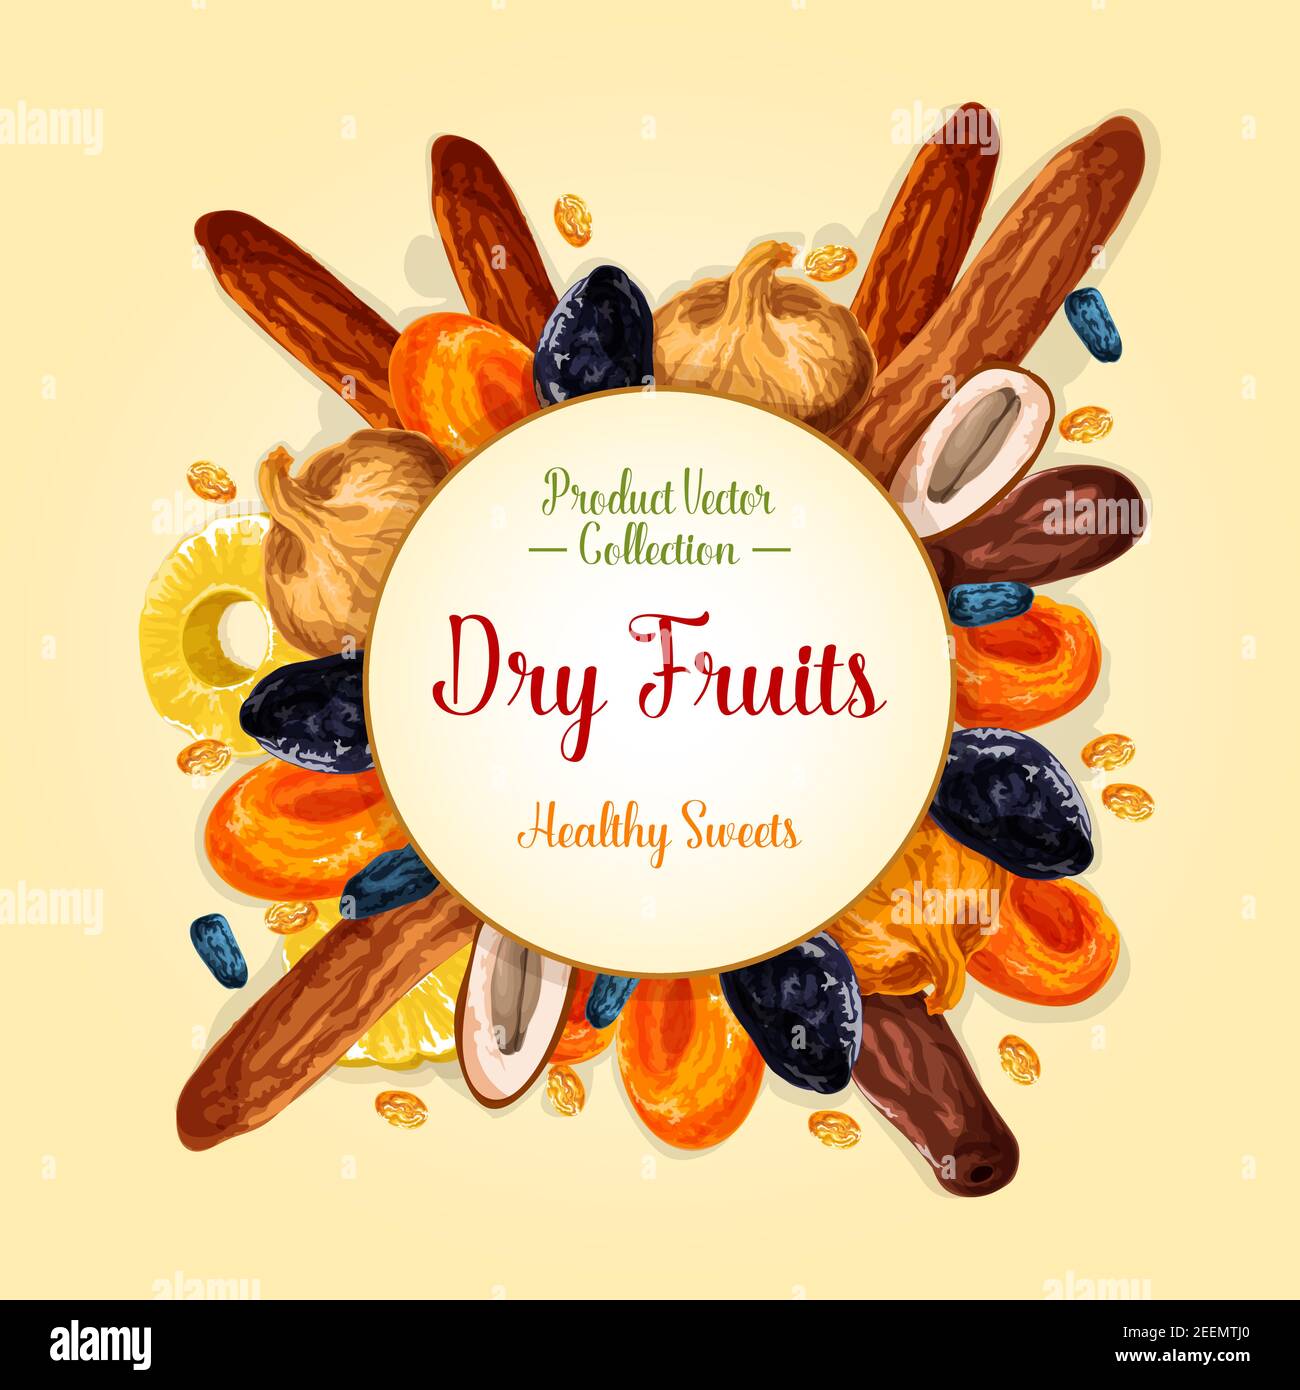 Is dried fruit a healthy snack?